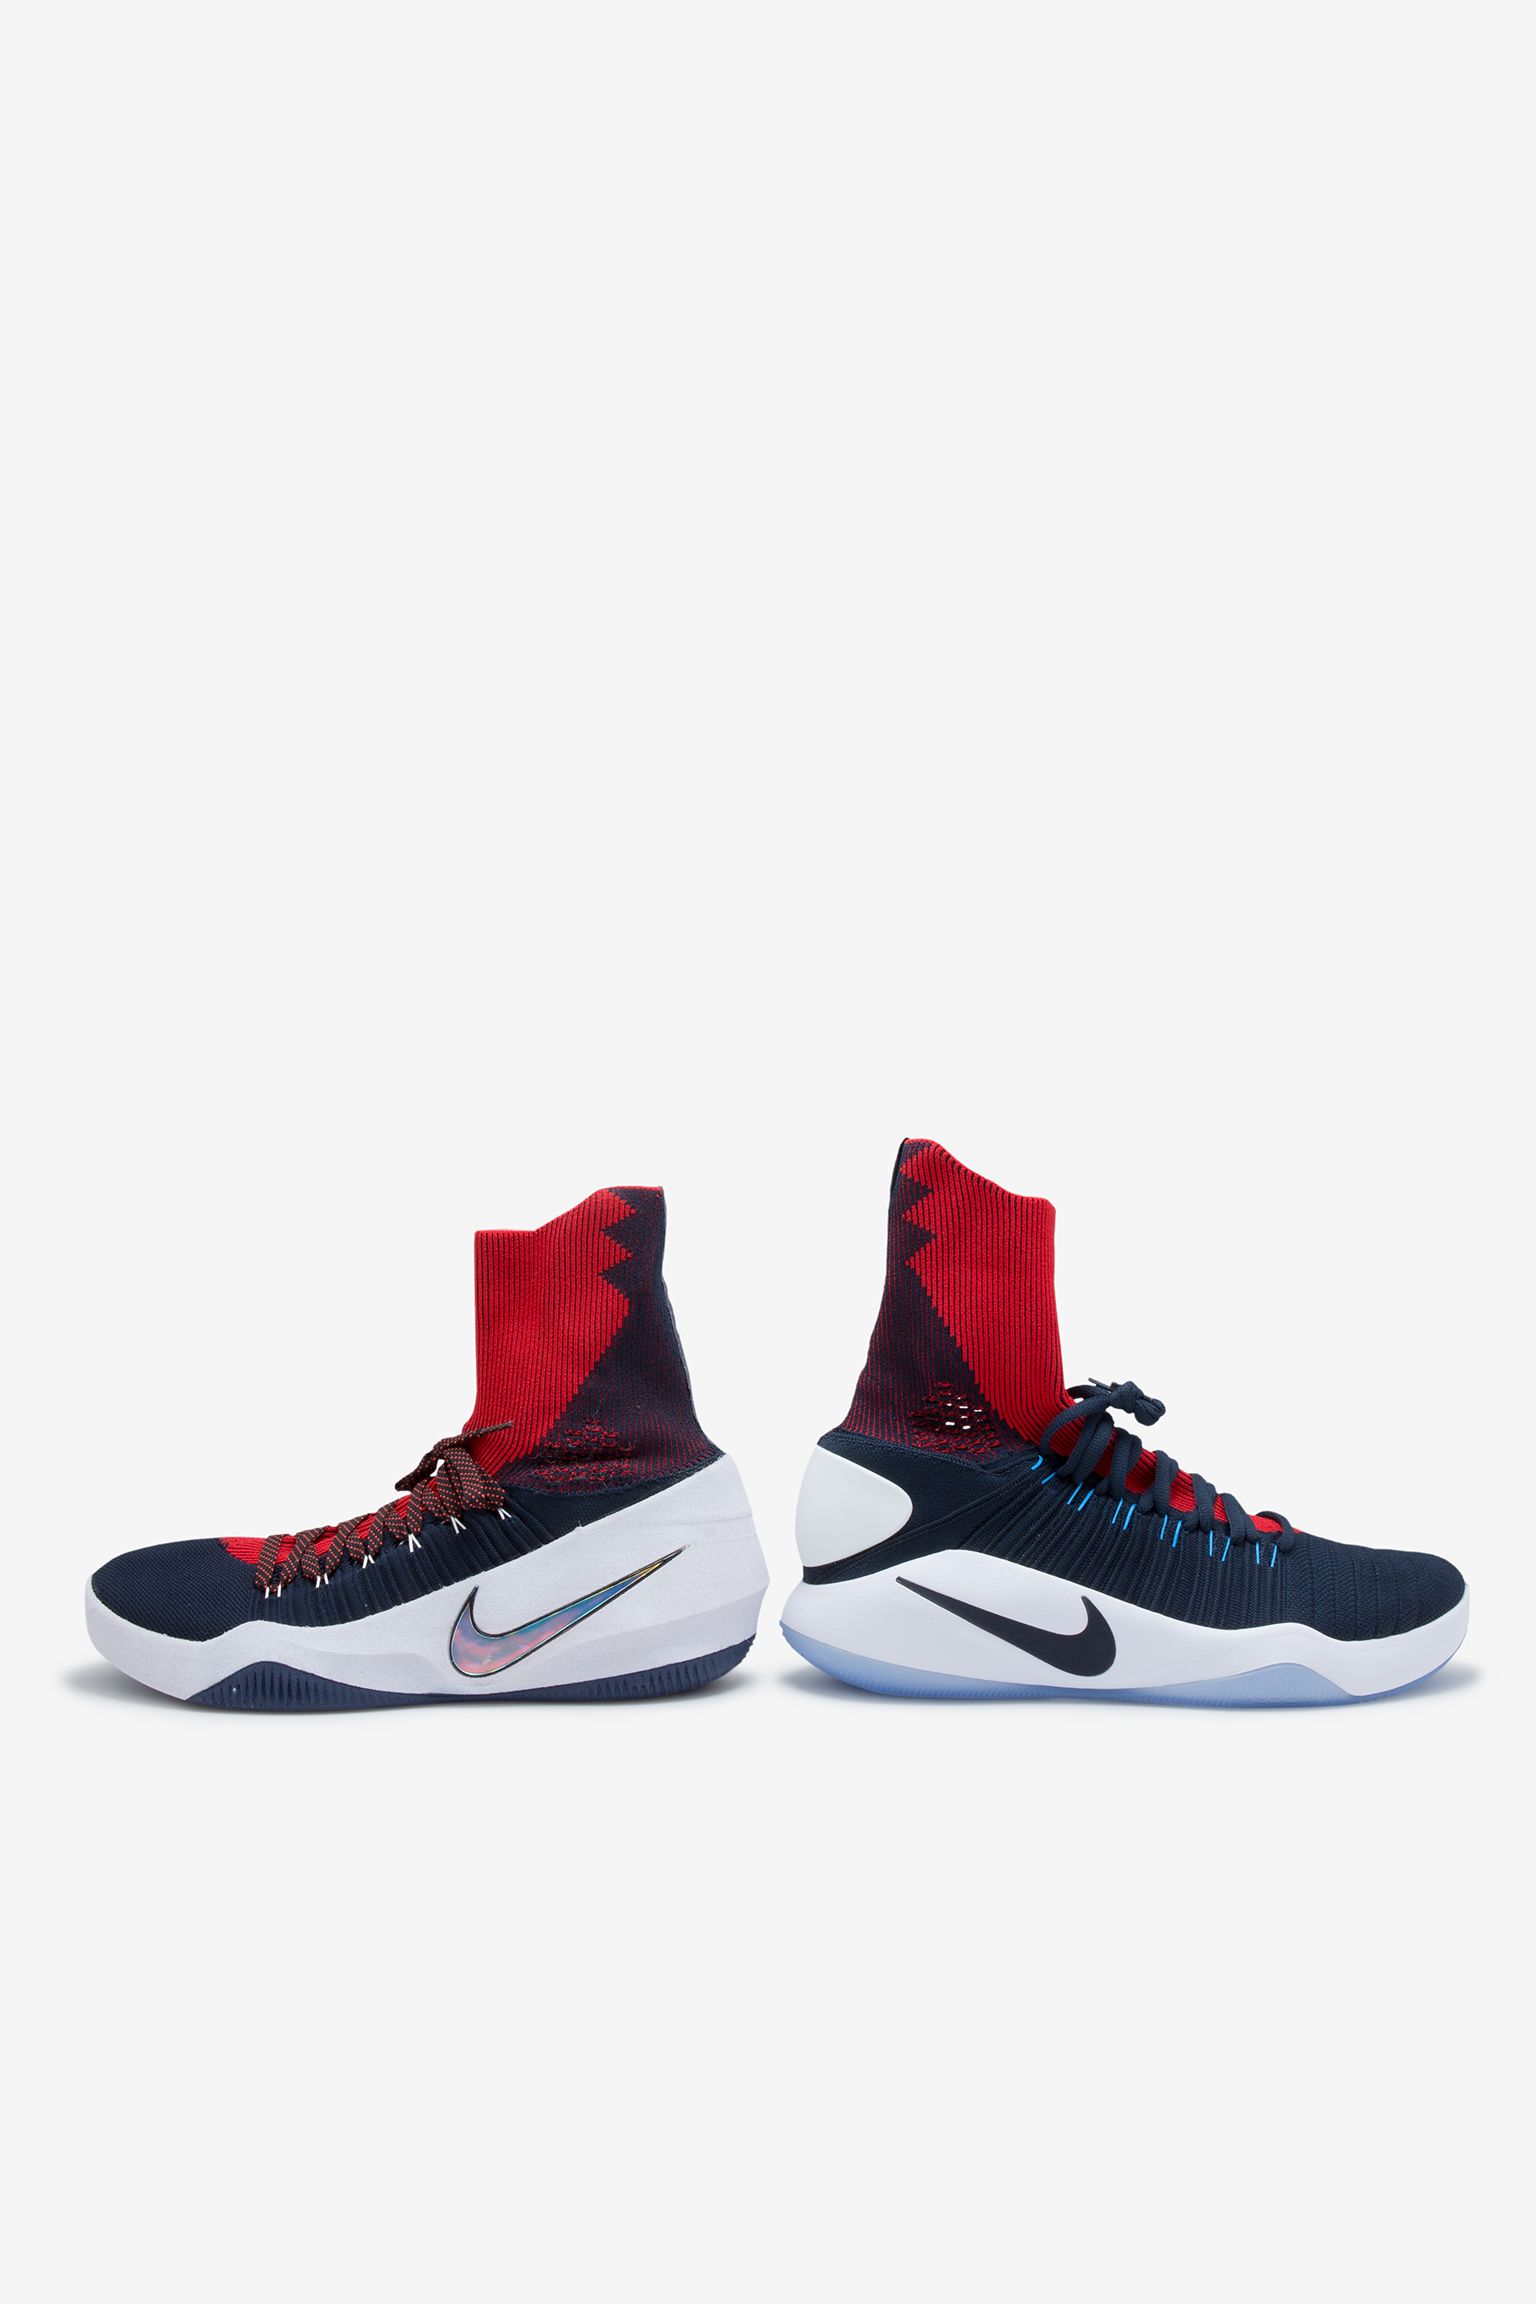 Nike ハイパーダンク 2016 フライニットのデザイン誕生まで. Nike SNKRS JP